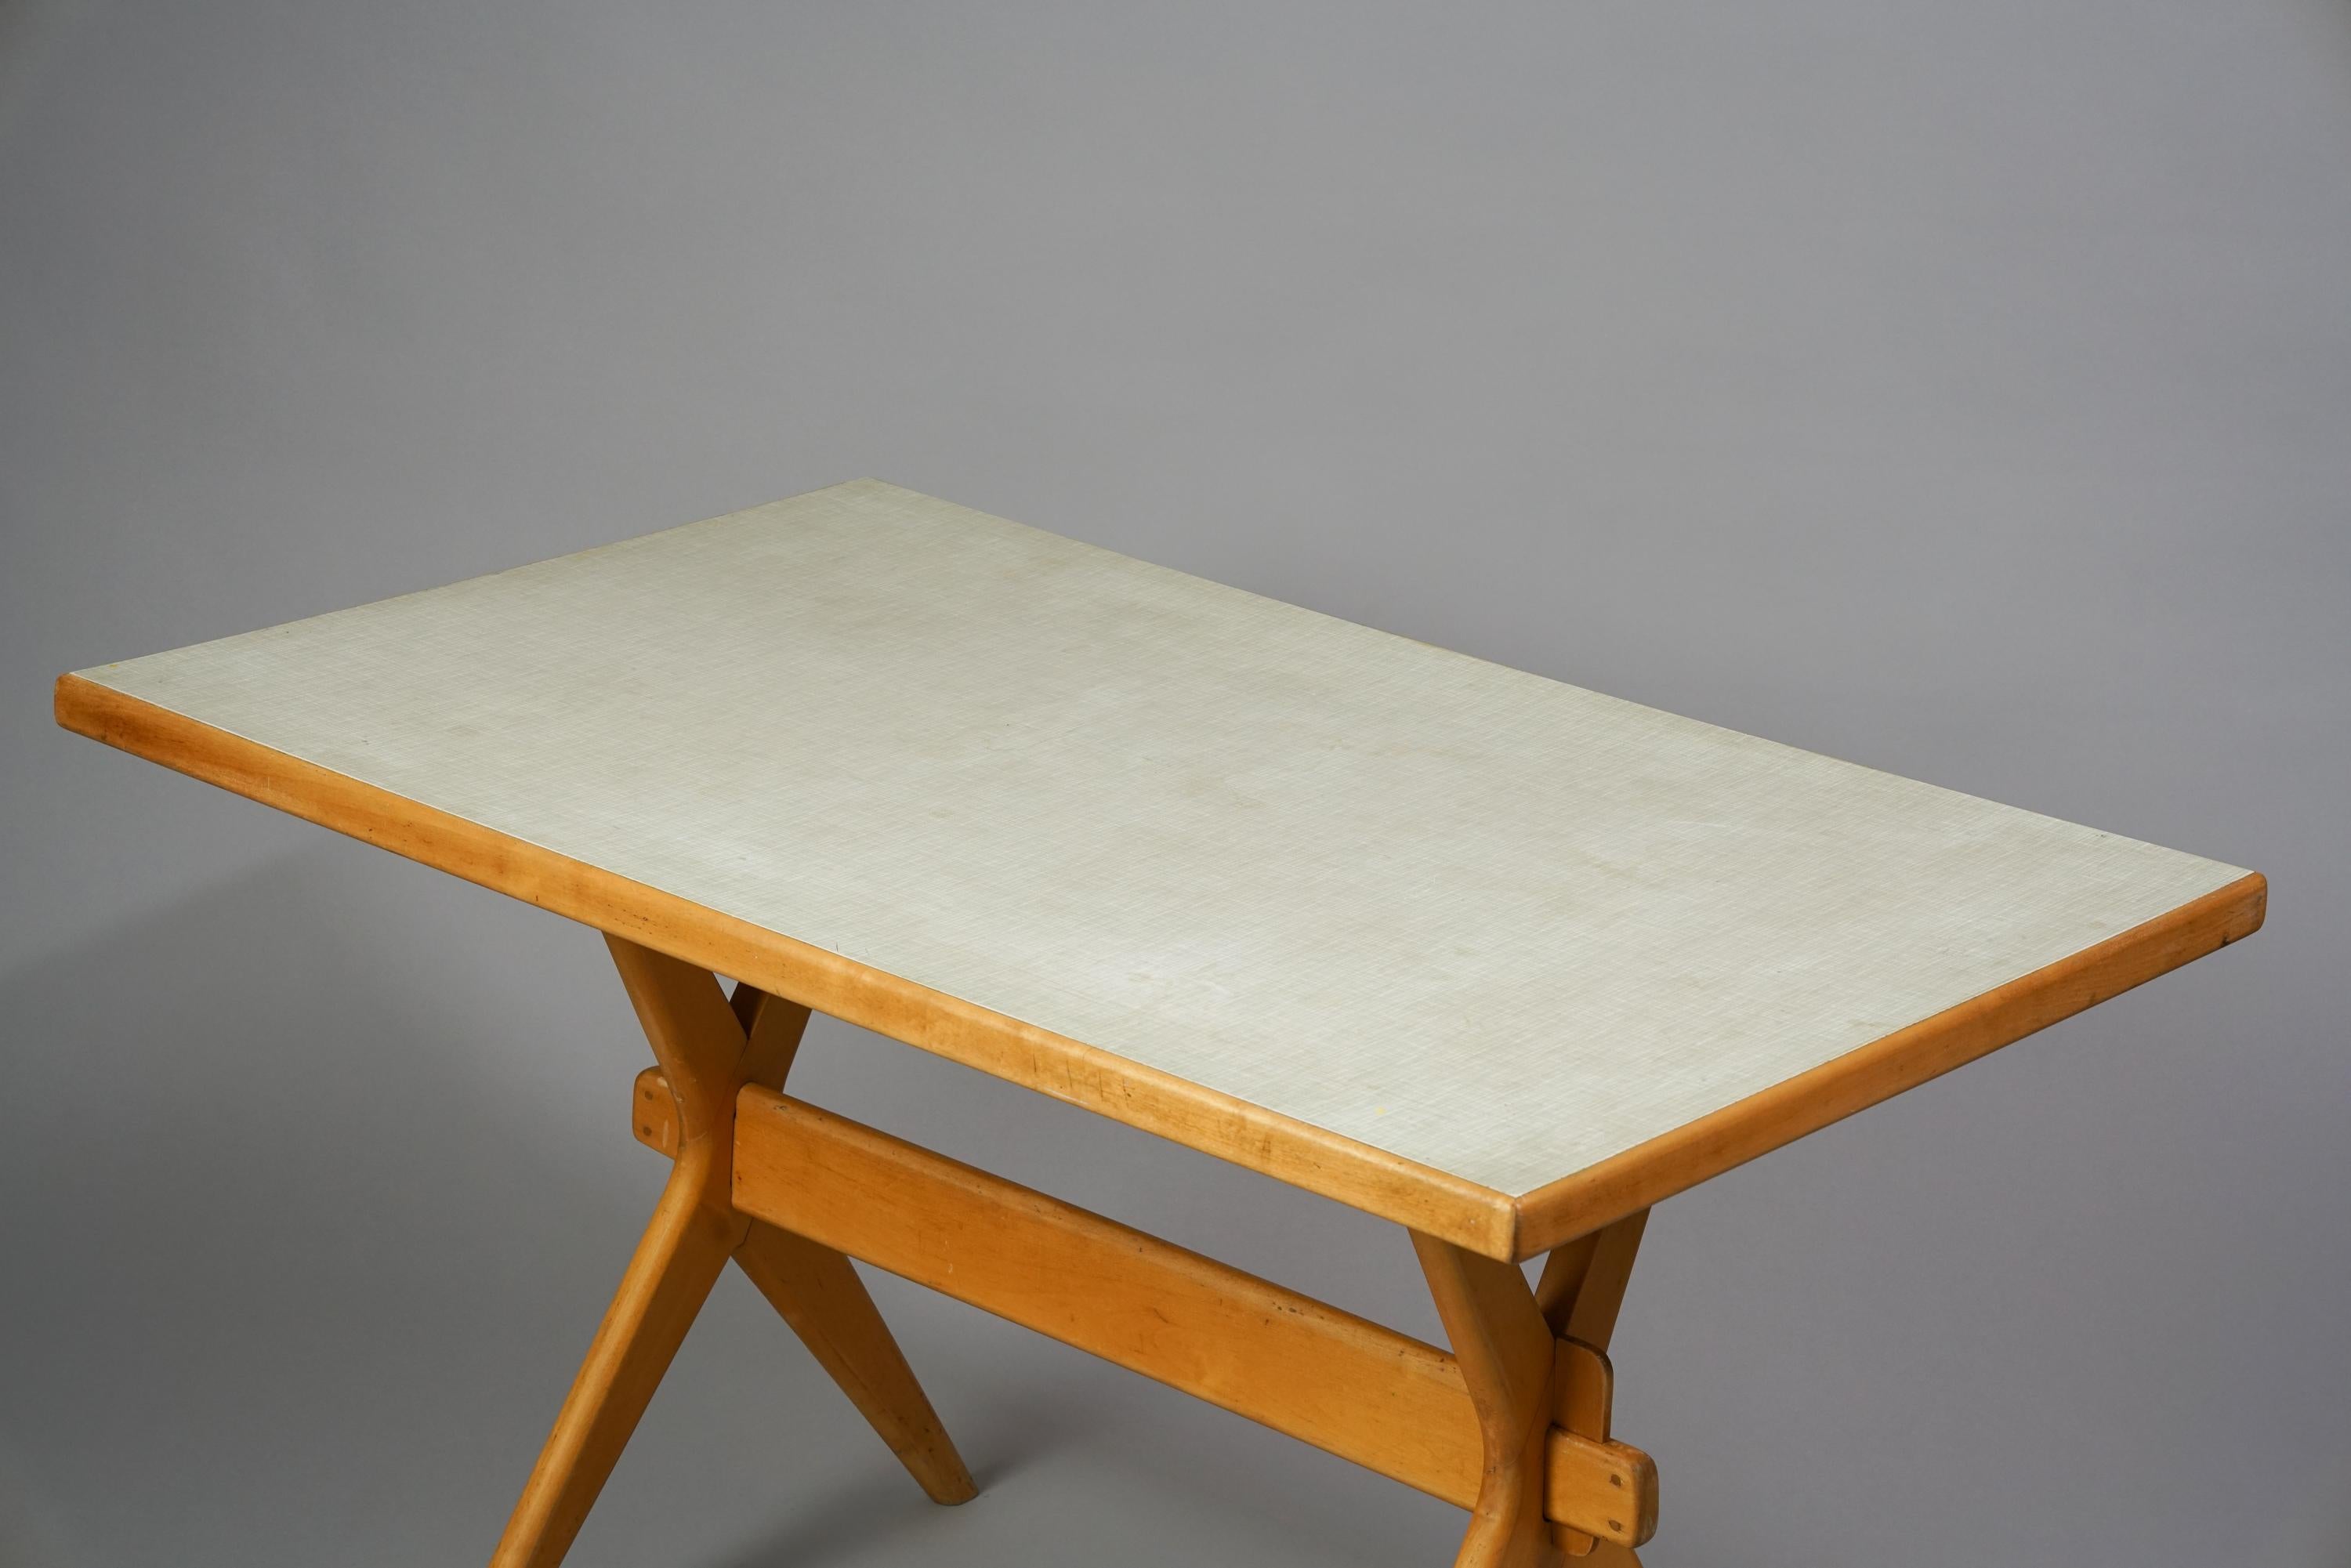 Ilmari Tapiovaara X Leg Dining Room Table from the 1950s. Birch frame with vinyl table top. Good vintage condition, wear and patina consistent with age and use.